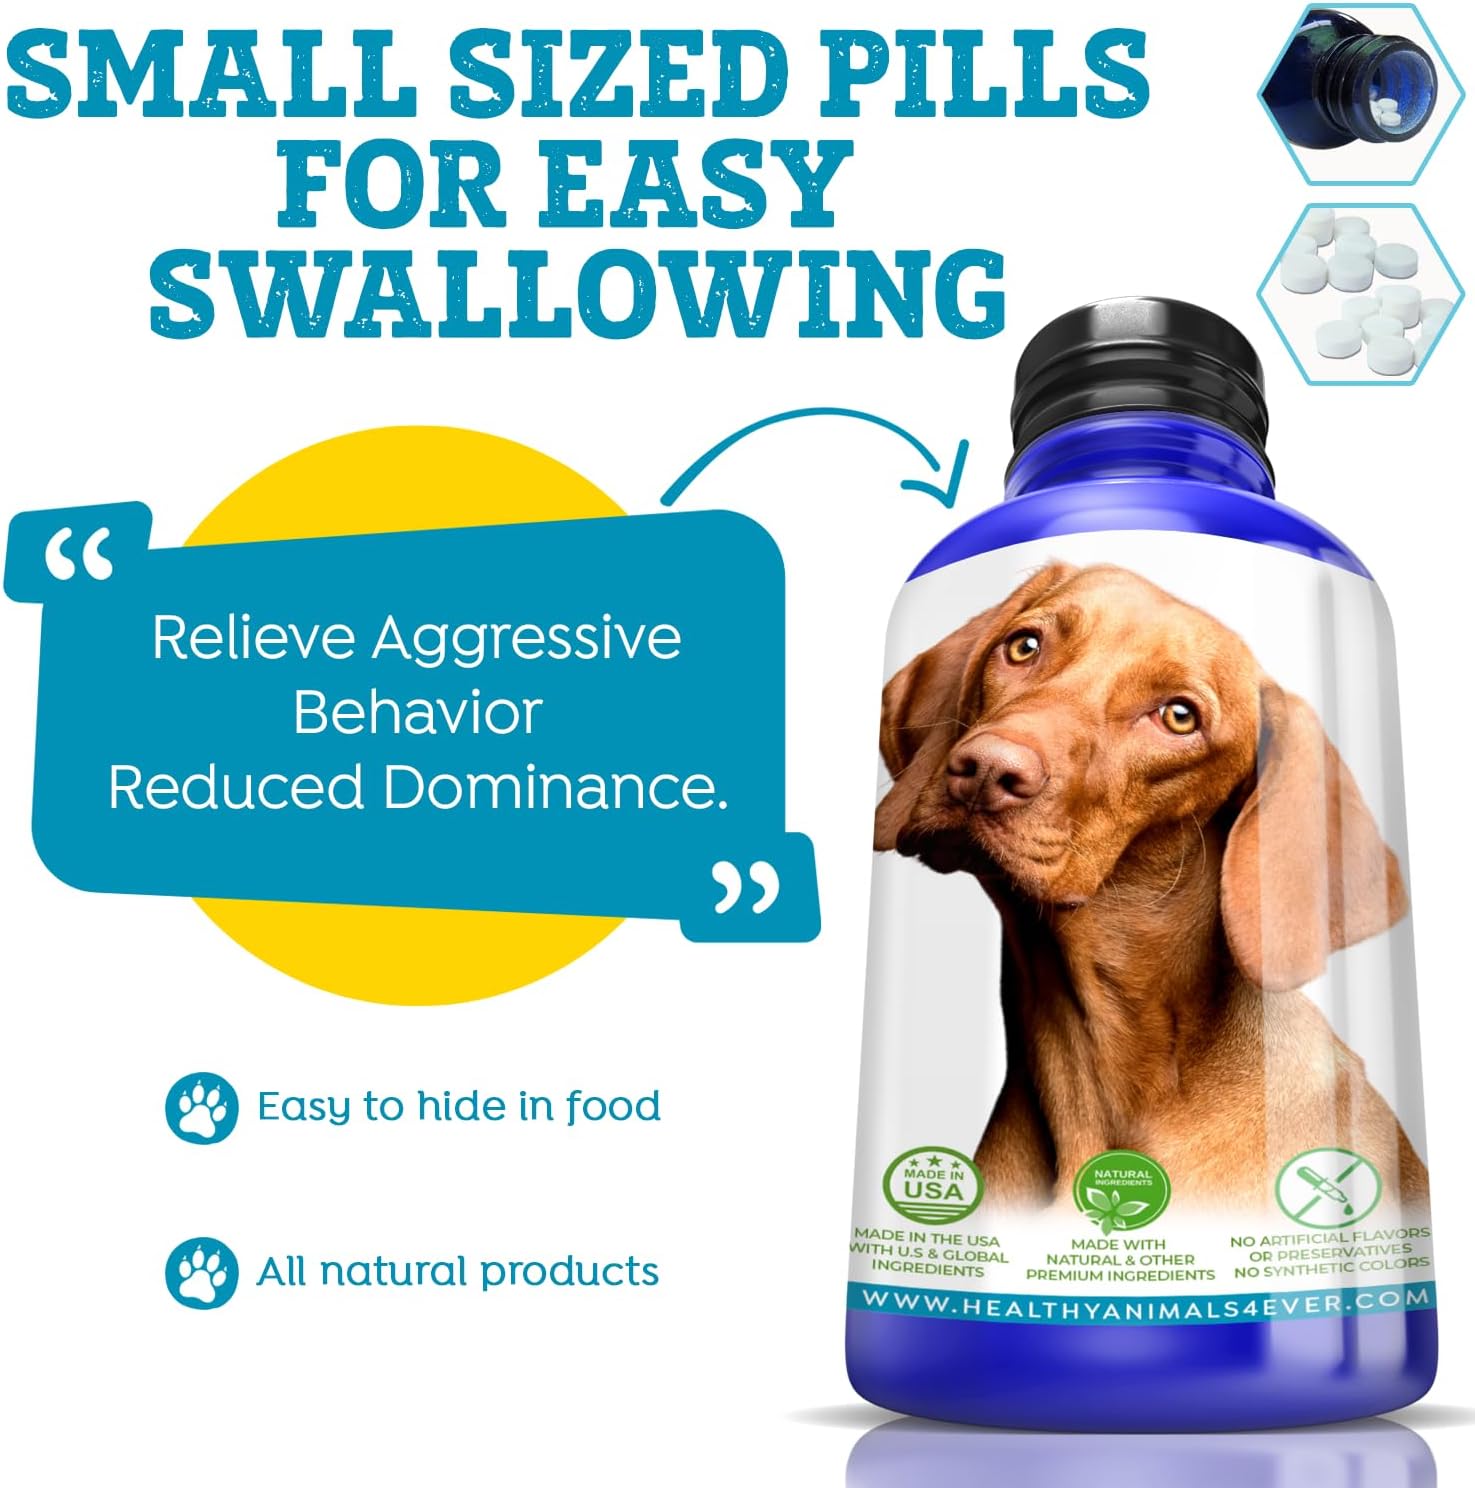 Healthy Animals 4Ever All-Natural Dog Calming Tablets for Stress and Aggressive Behavior - Help Reduce Dog Aggression/Frustration & Promote Relaxation - Homeopathic & Highly Effective - 300 Tablets